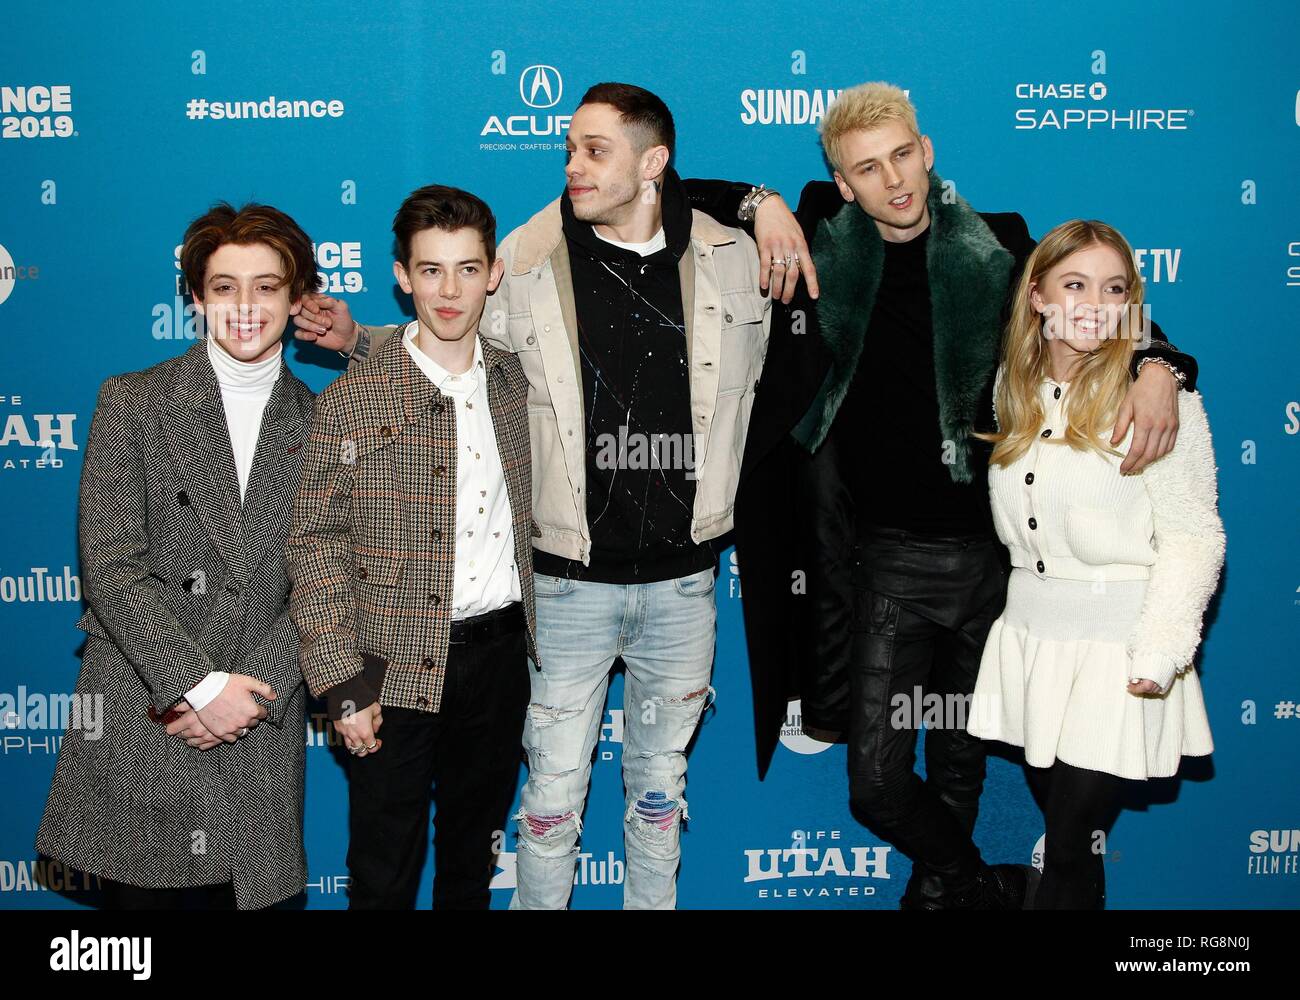 Park City, UT, USA. 28th Jan, 2019. Thomas Barbusca, Griffin Gluck, Pete Davidson, Colson Baker (aka 'Machine Gun Kelly'), Sydney Sweeney at arrivals for BIG TIME ADOLESCENCE Premiere at Sundance Film Festival 2019, George S. and Dolores Eccles Center for the Performing Arts, Park City, UT January 28, 2019. Credit: JA/Everett Collection/Alamy Live News Stock Photo